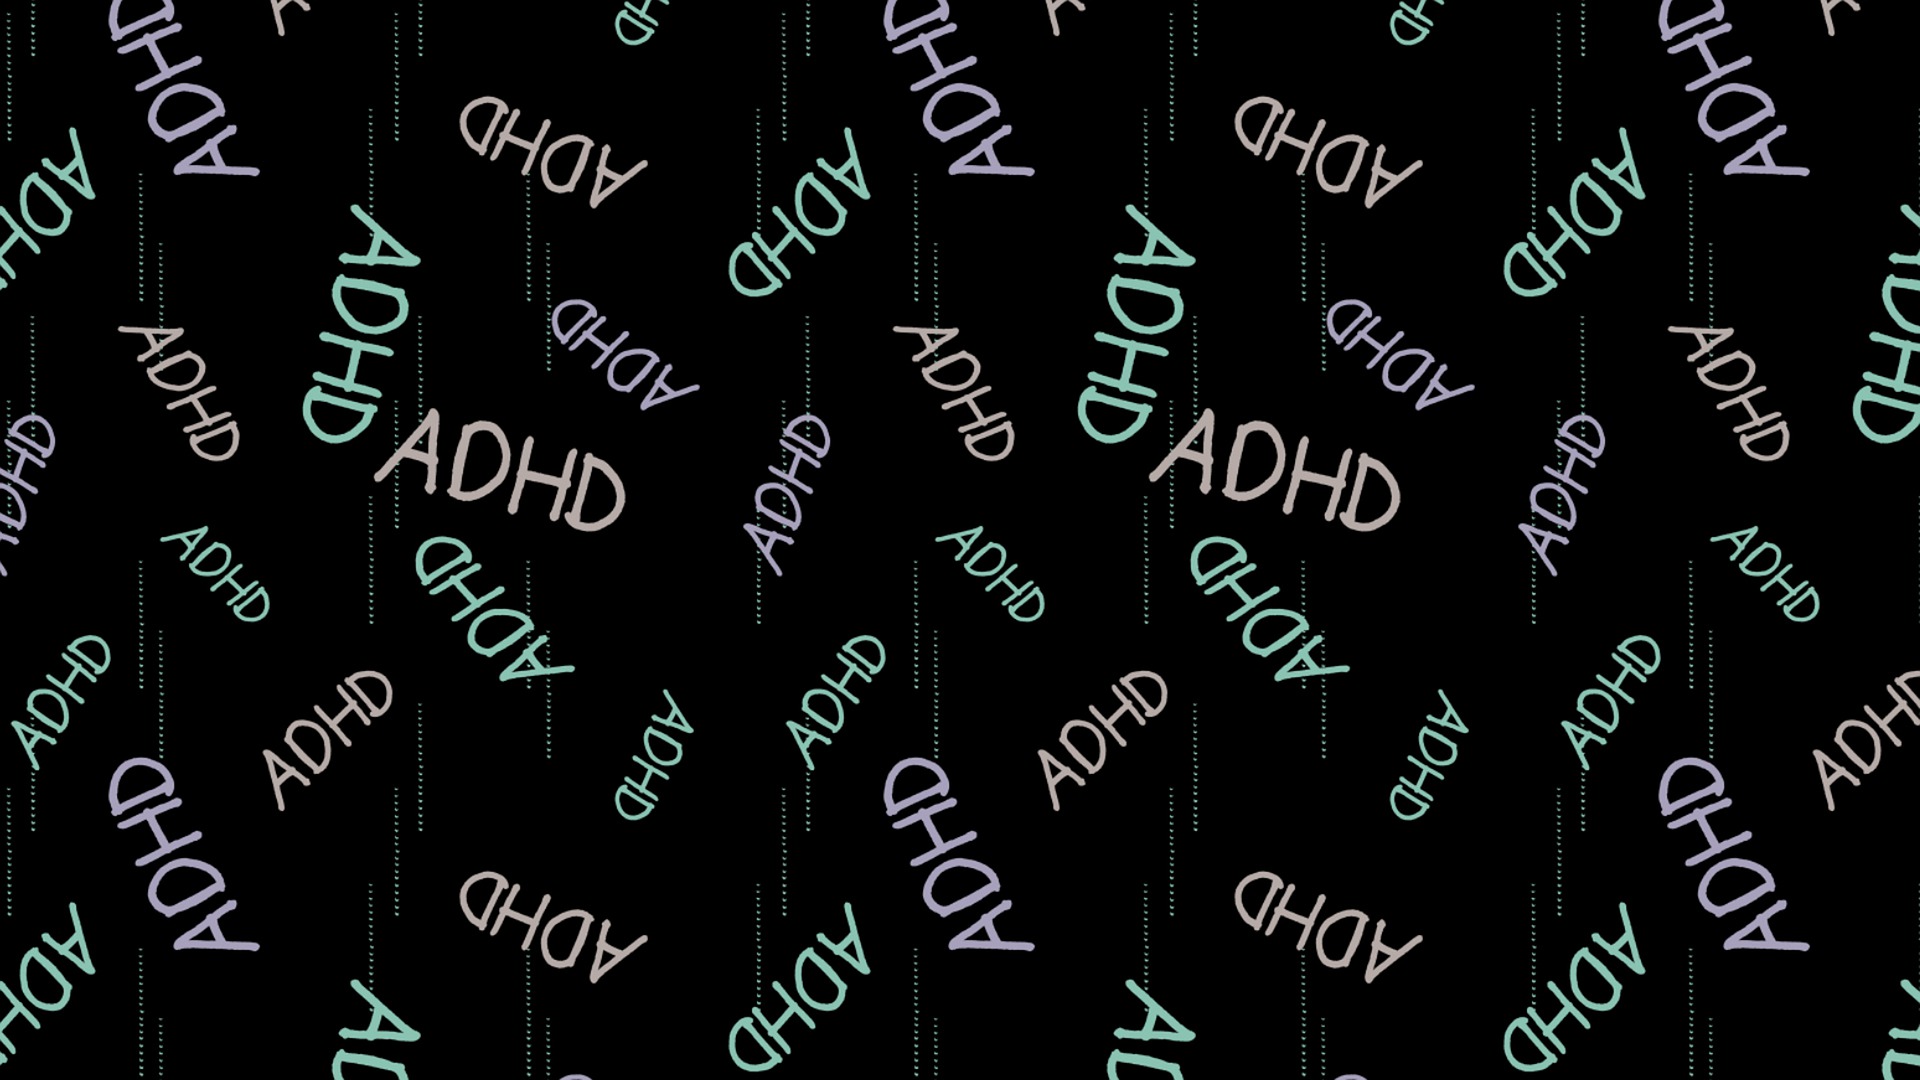 ADHD risks are shown with this ADHD wallpaper.